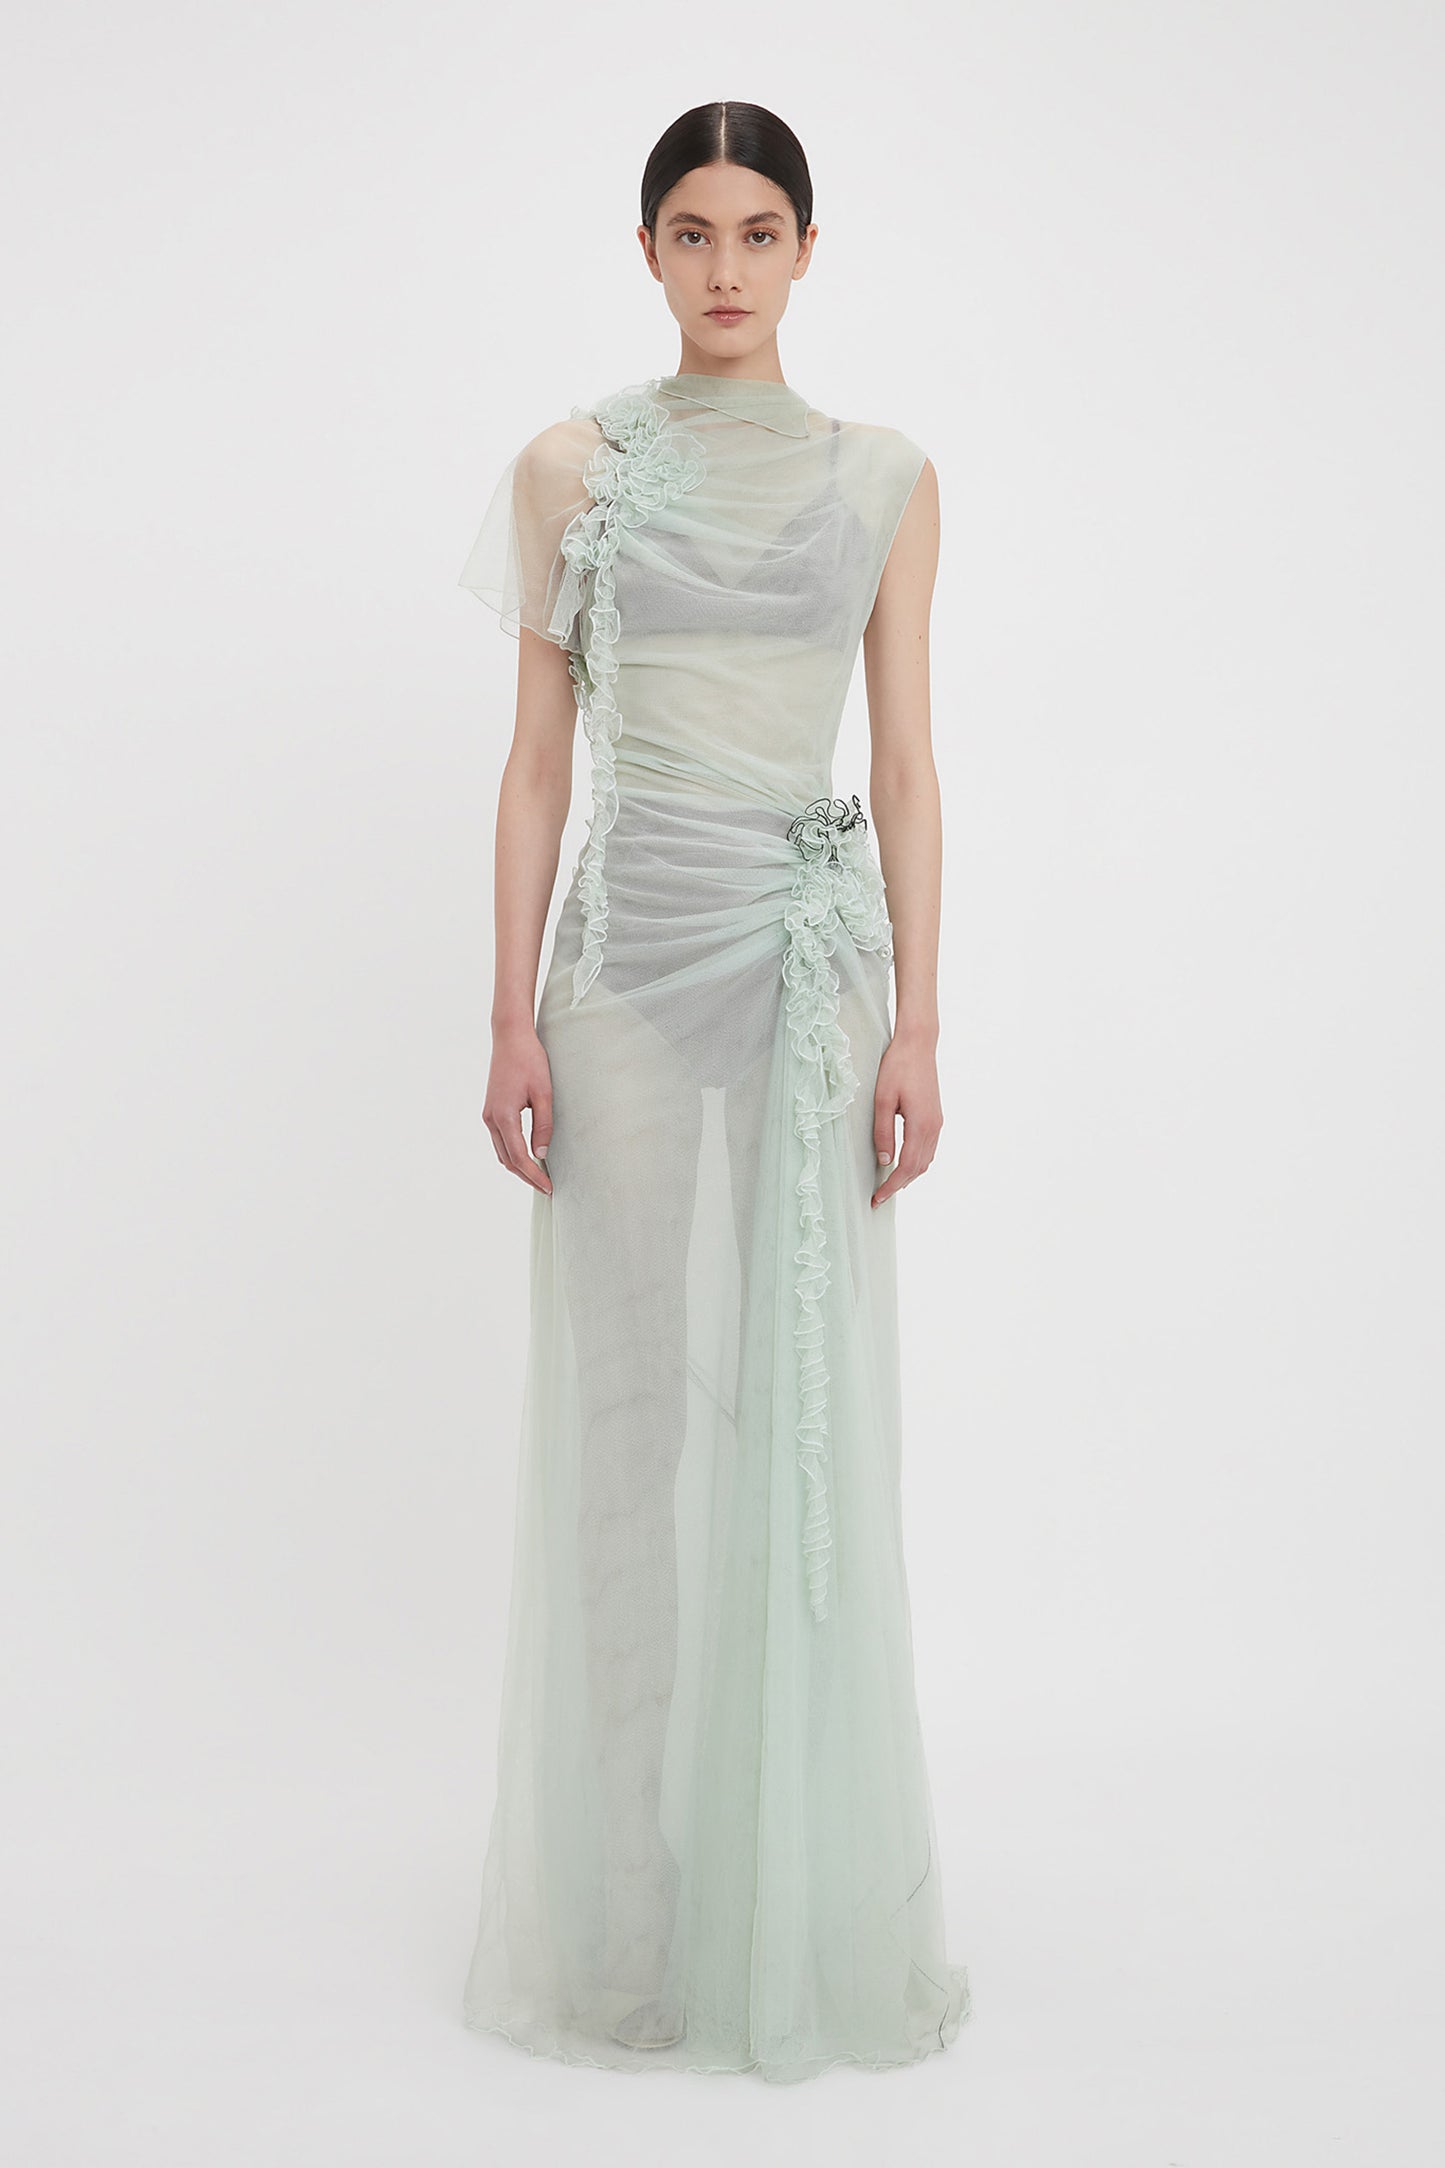 A woman stands against a white background wearing an ethereal, sea foam green tulle gown adorned with floral appliqués. The Gathered Tulle Detail Floor-Length Dress In Jade by Victoria Beckham has an asymmetrical design with a draped and flowing silhouette, embodying the elegance found at VictoriaBeckham.com.